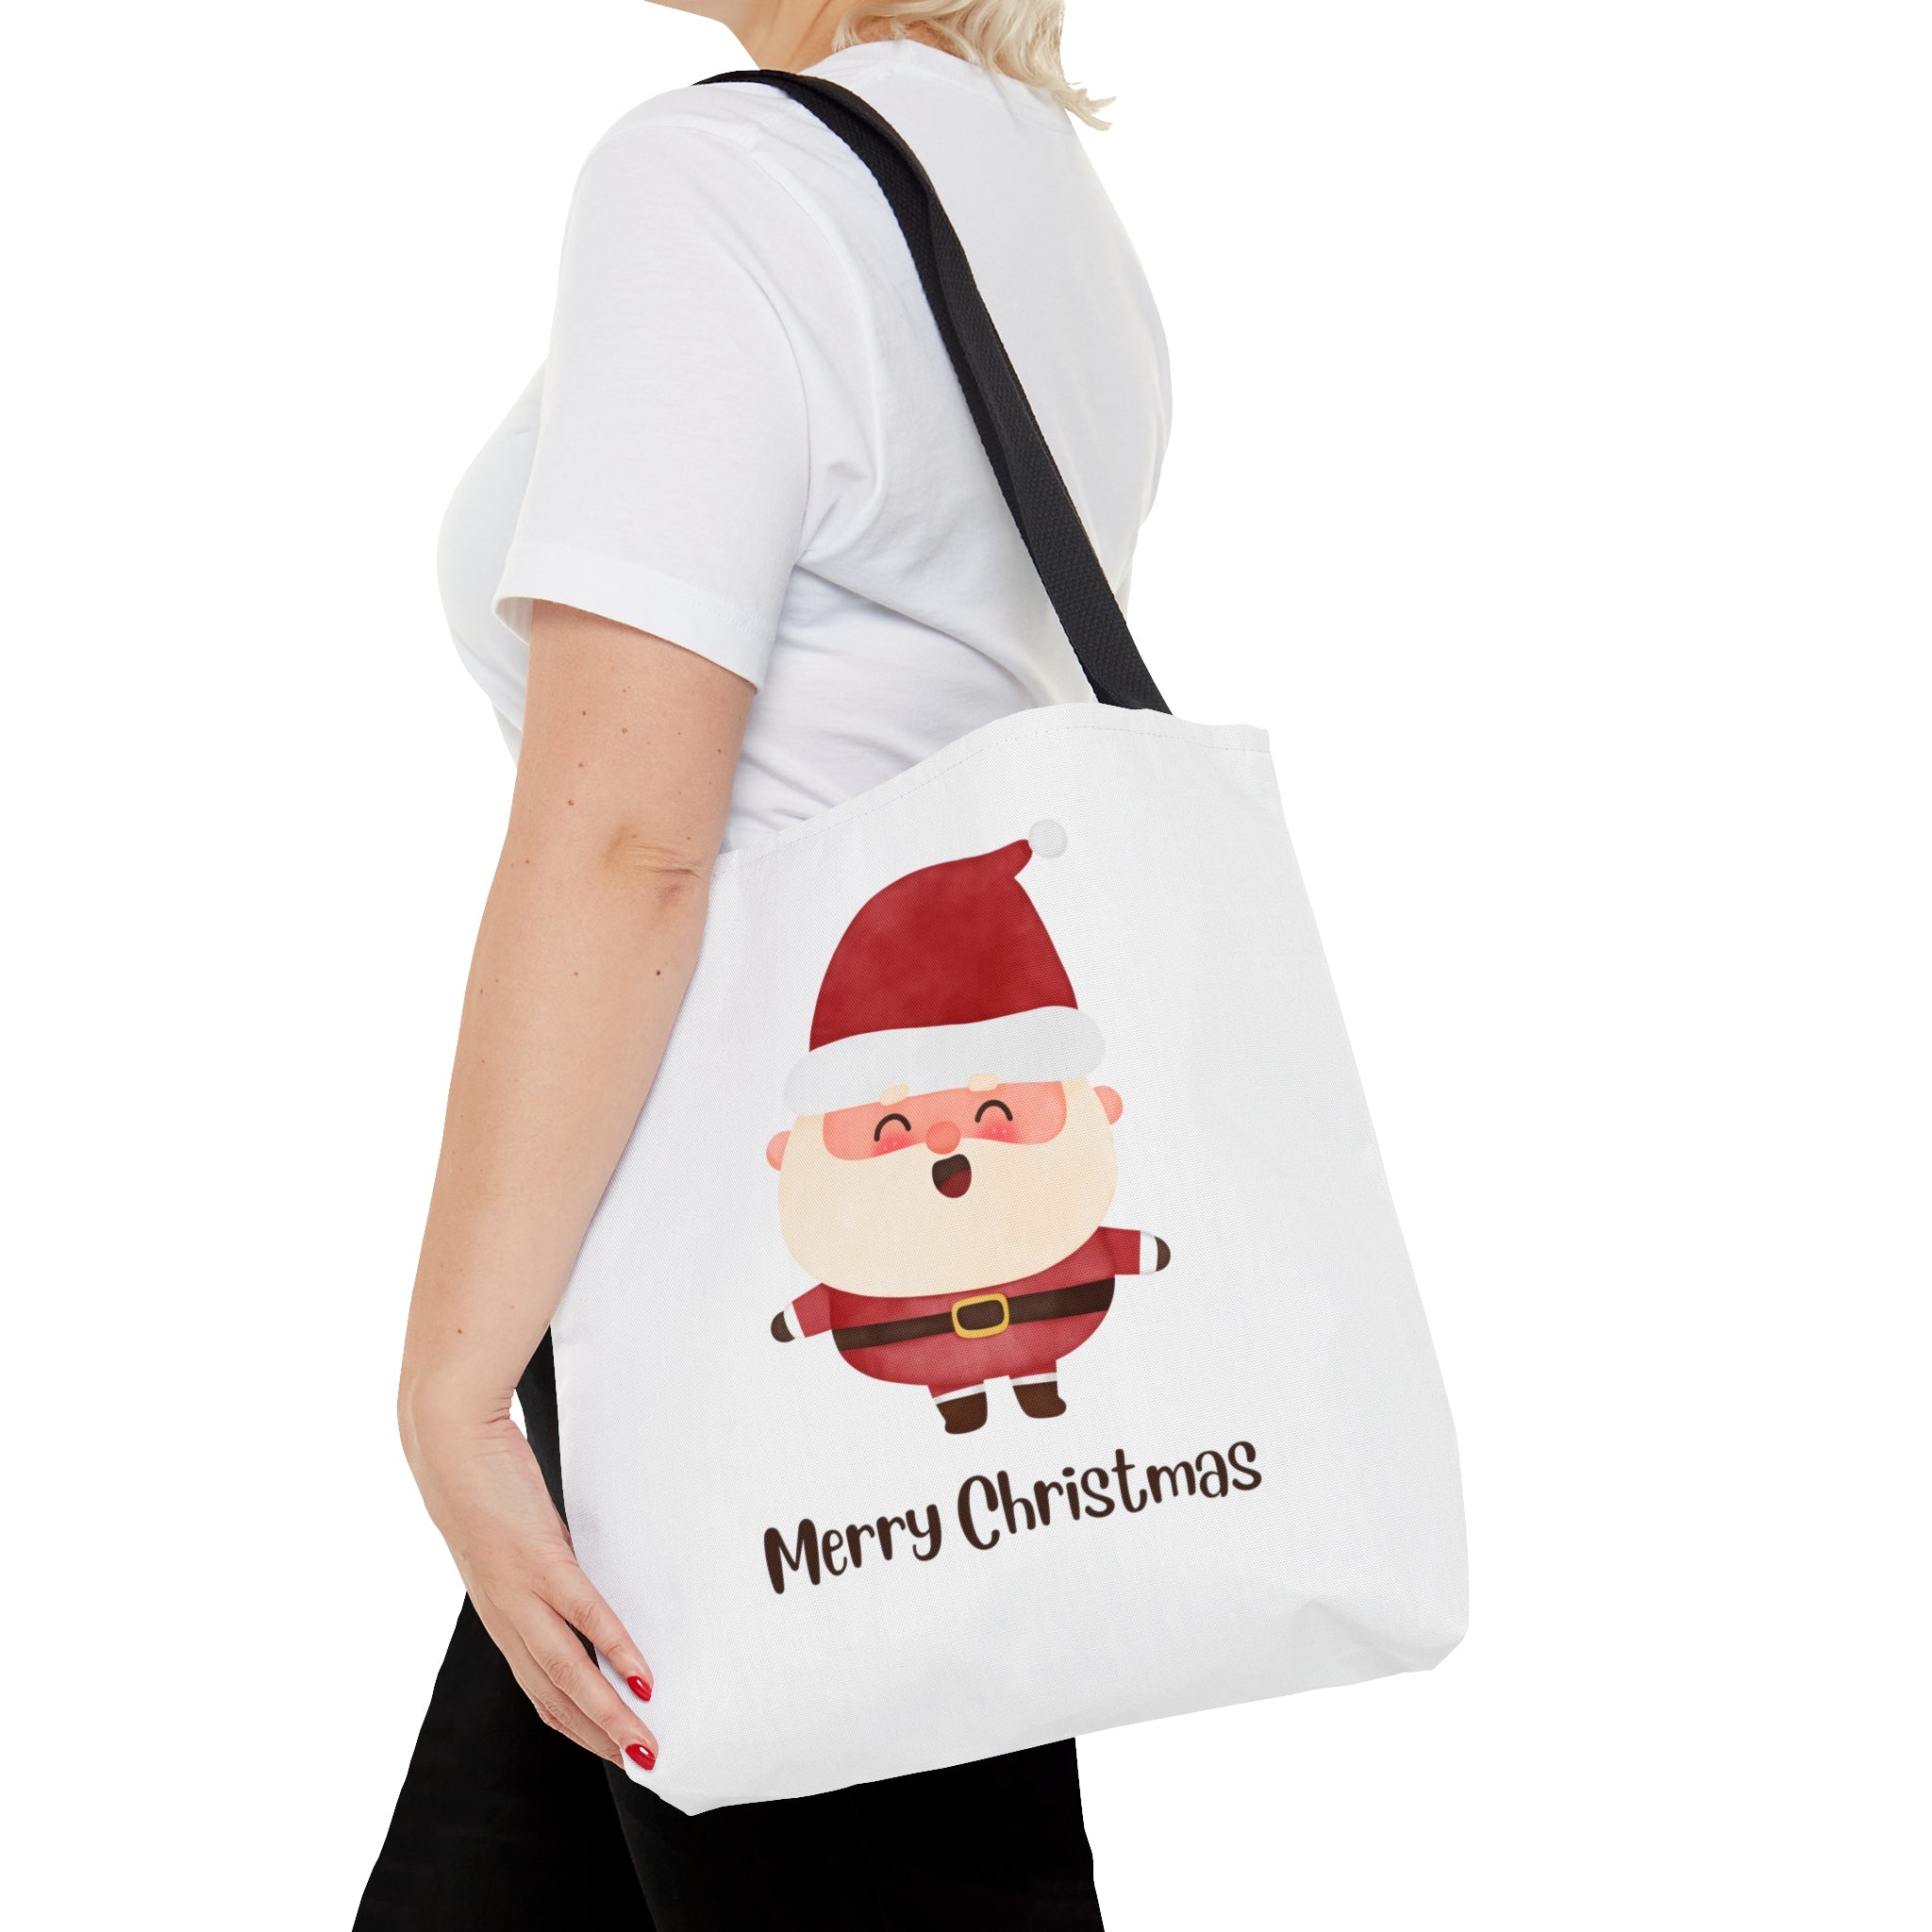 Merry Christmas Tote Bag, Reusable Canvas Santa Tote Bags, Available in Different Size